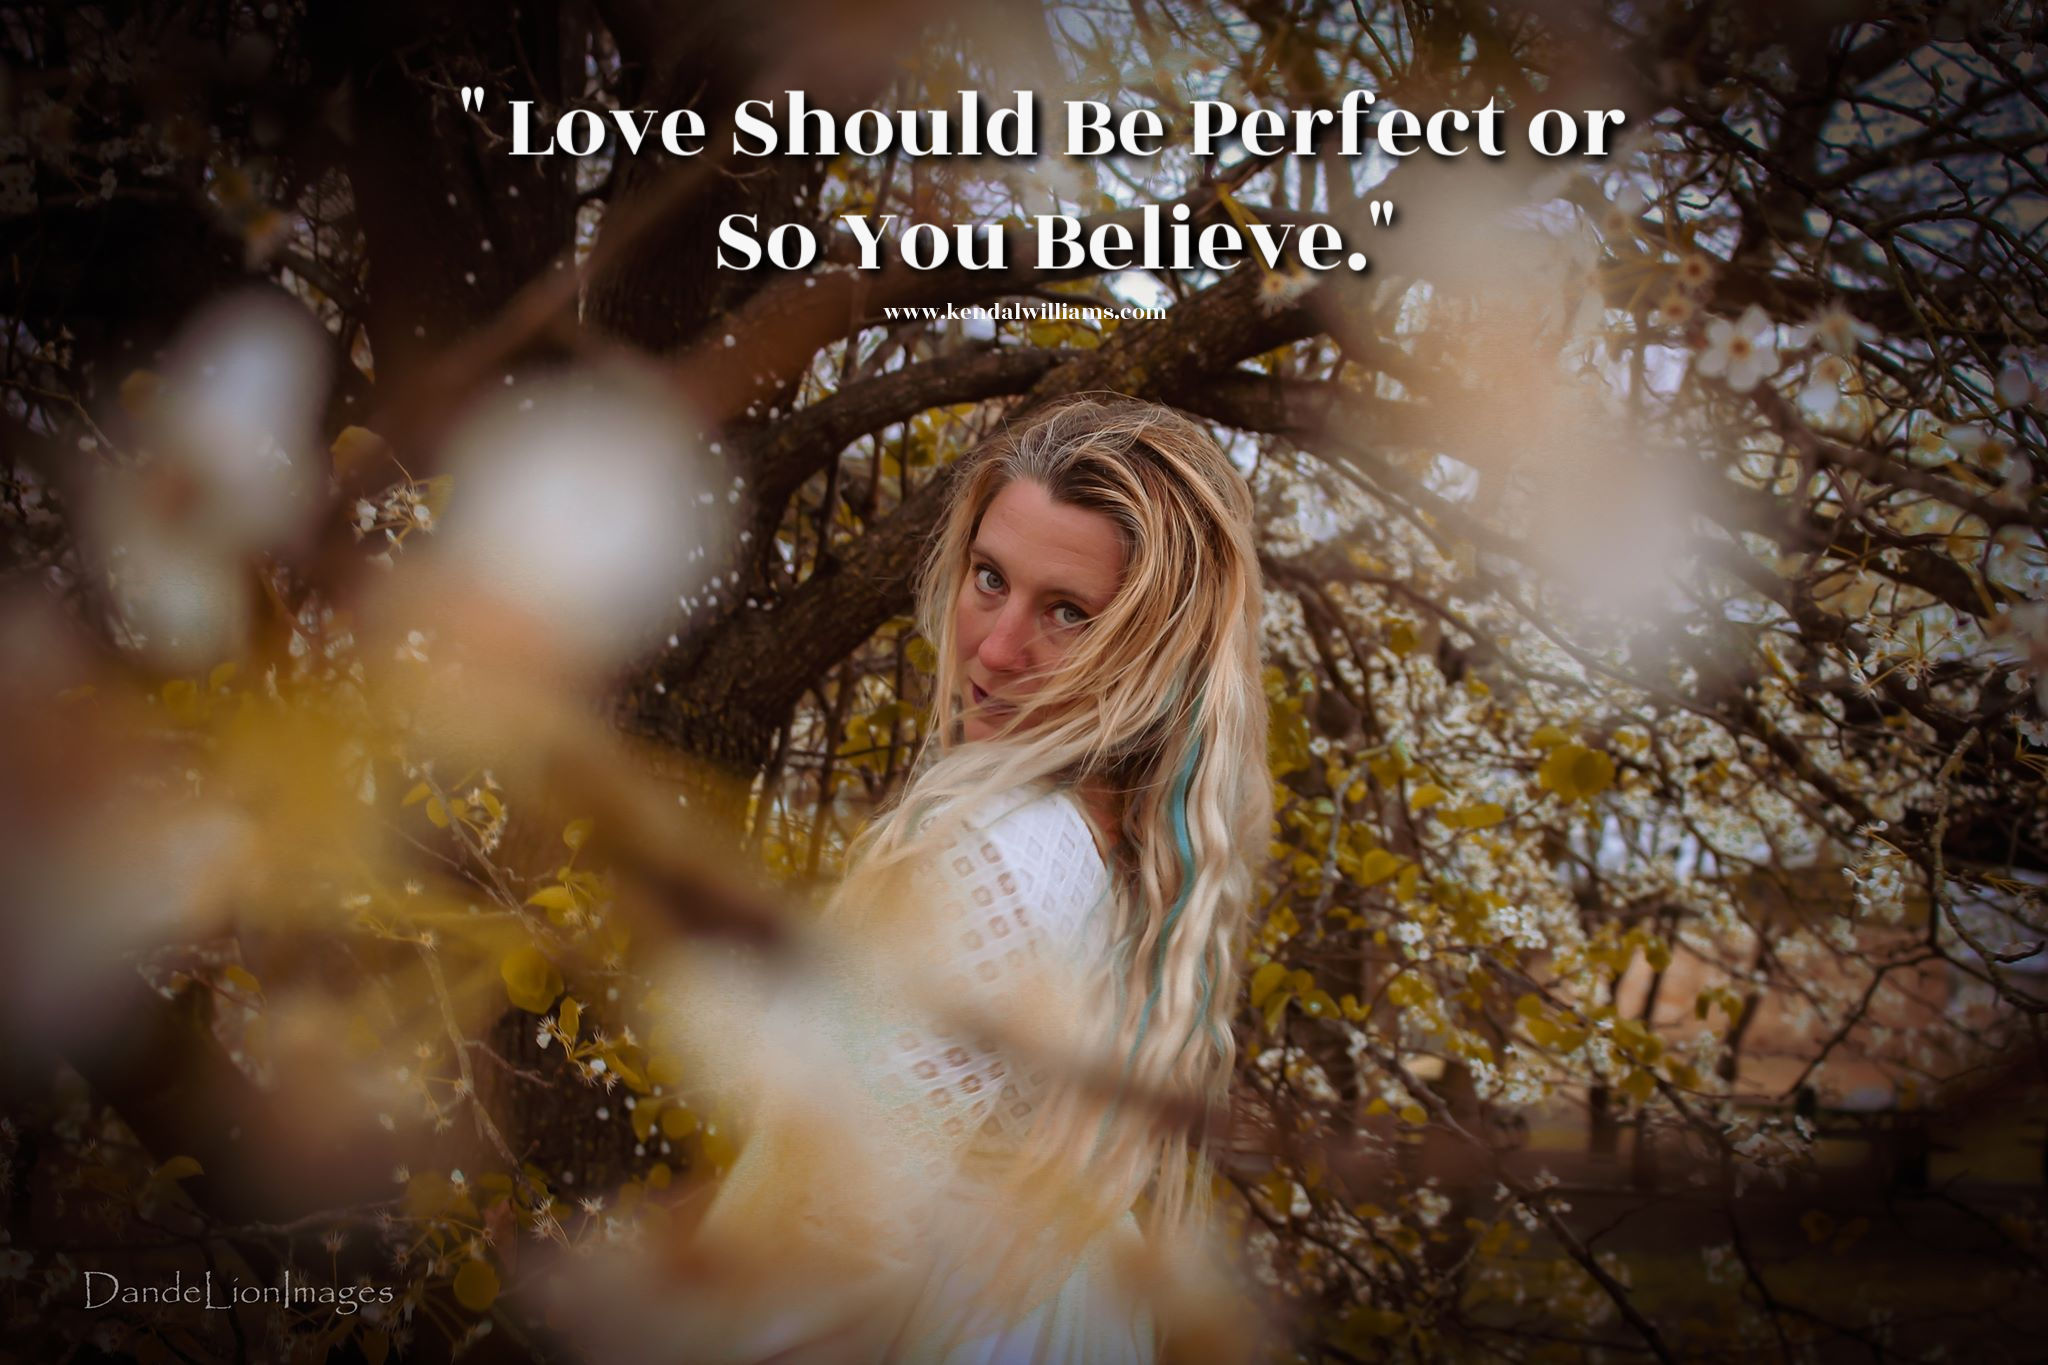 LOVE SHOULD BE PERFECT.